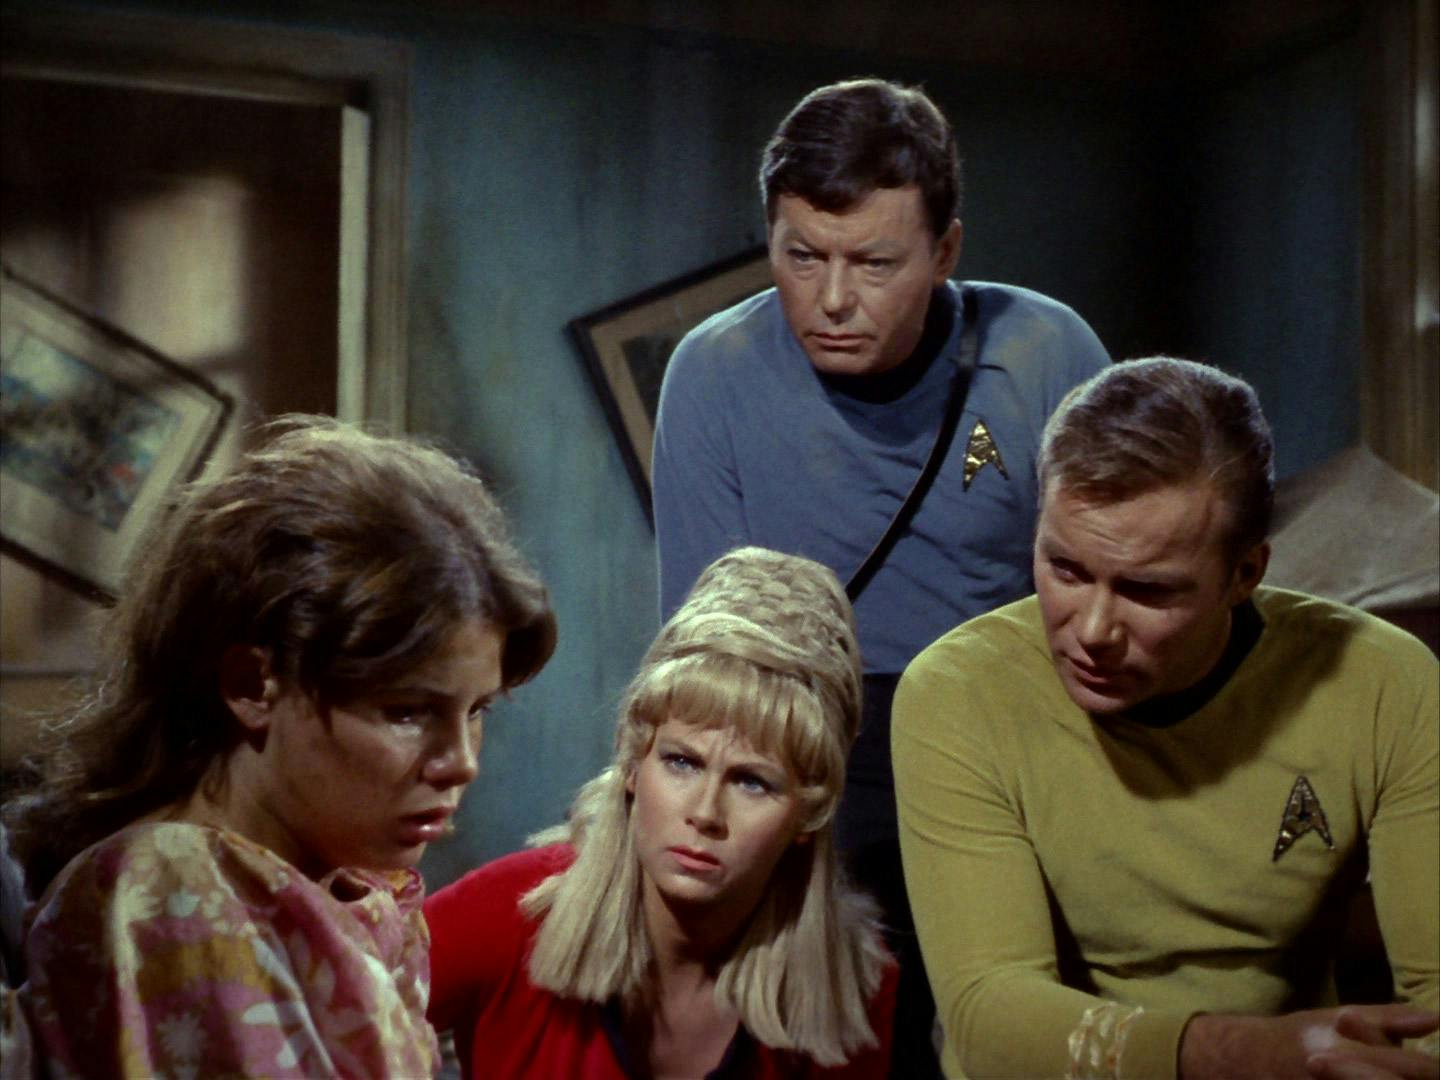 On an Earth-like planet, McCoy, Yeoman Rand, and Kirk huddle near a disheveled teen girl who tells them about how adults on the planet are ravaged by a plague in 'Miri'